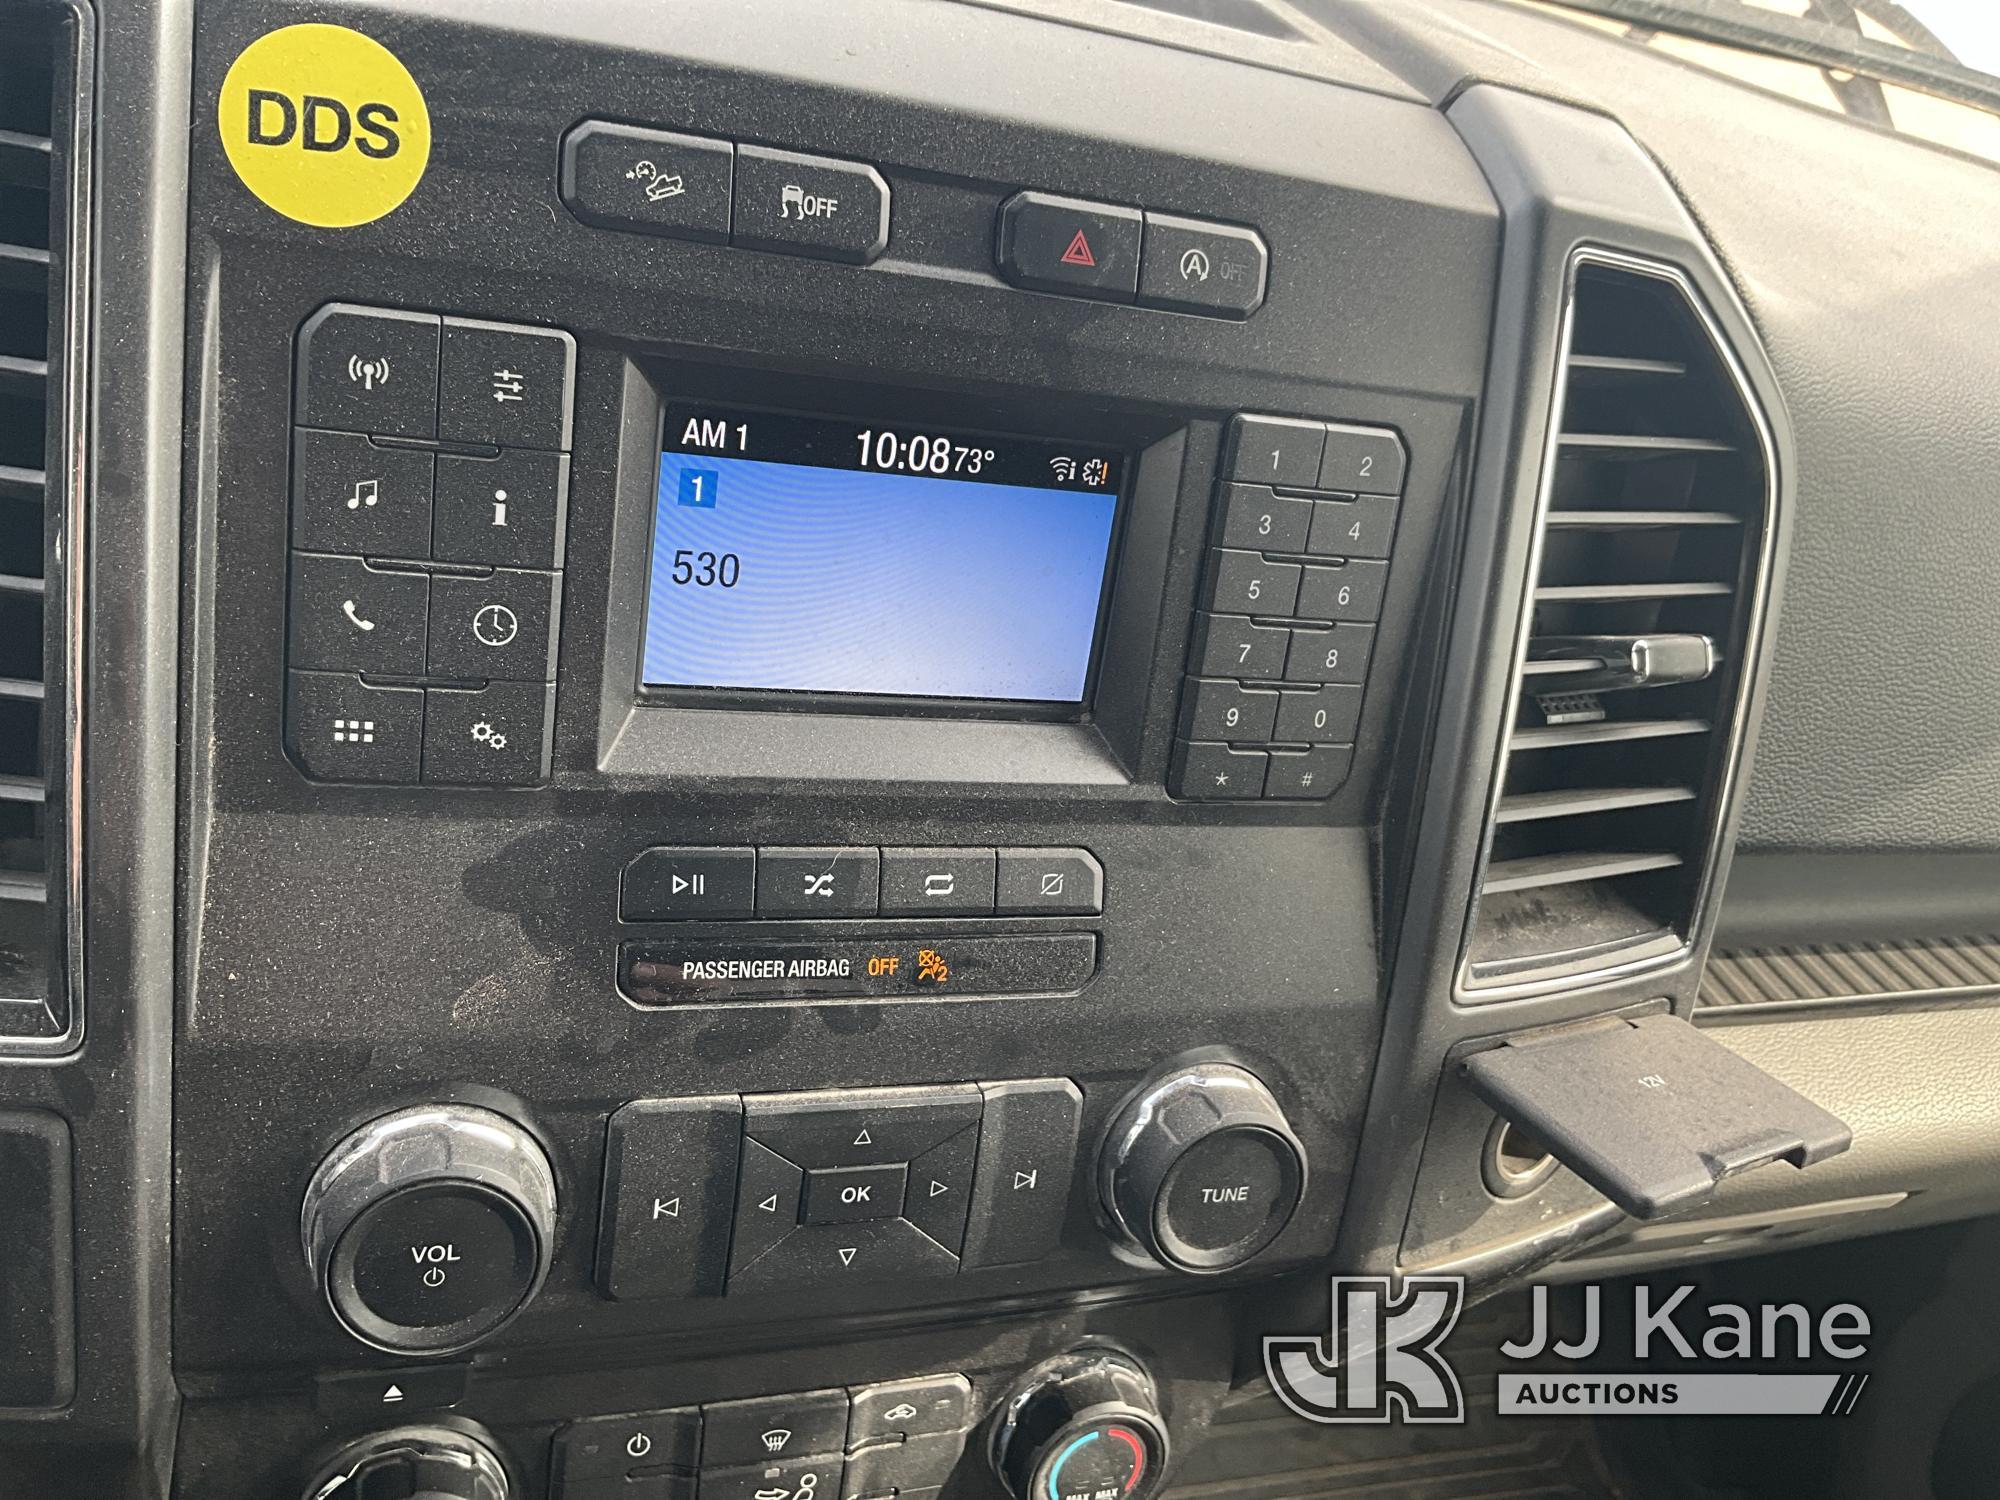 (Midland, TX) 2018 Ford F150 4x4 Crew-Cab Pickup Truck Not Running, Condition Unknown) (Will Crank,